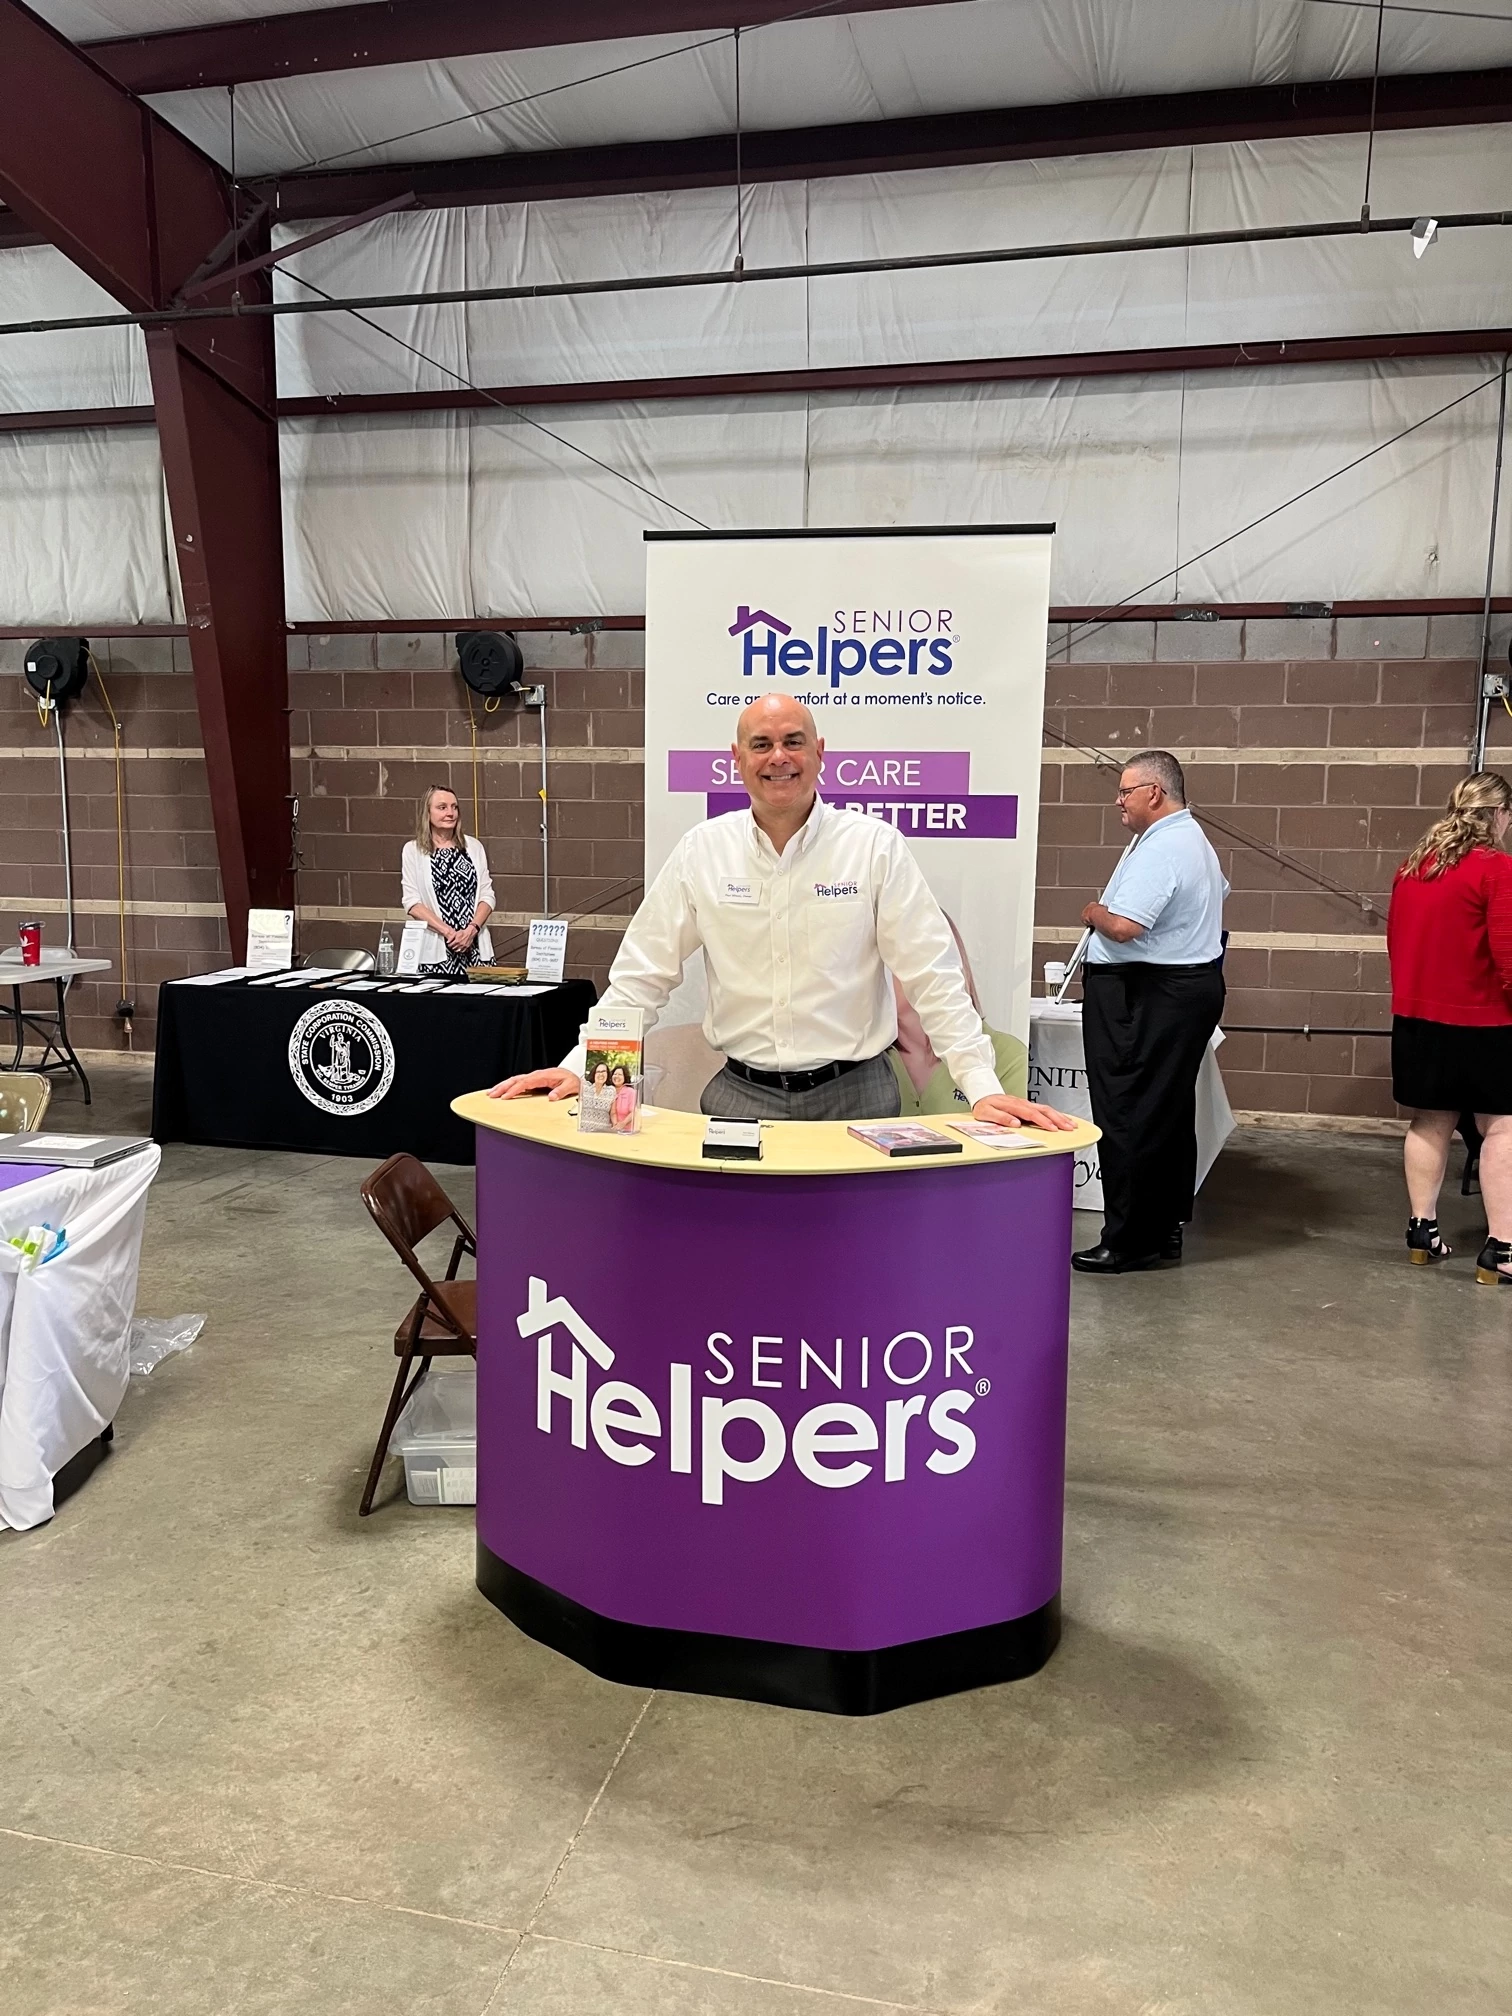 Senior Helpers was happy to be one of 35 sponsors at The Chesterfield Triad at the Chesterfield Fairgrounds this week.  The Triad is an annual event put together by the Chesterfield Aging & Disability Services and we provided over 225 attendees with information about resources for seniors in our community.